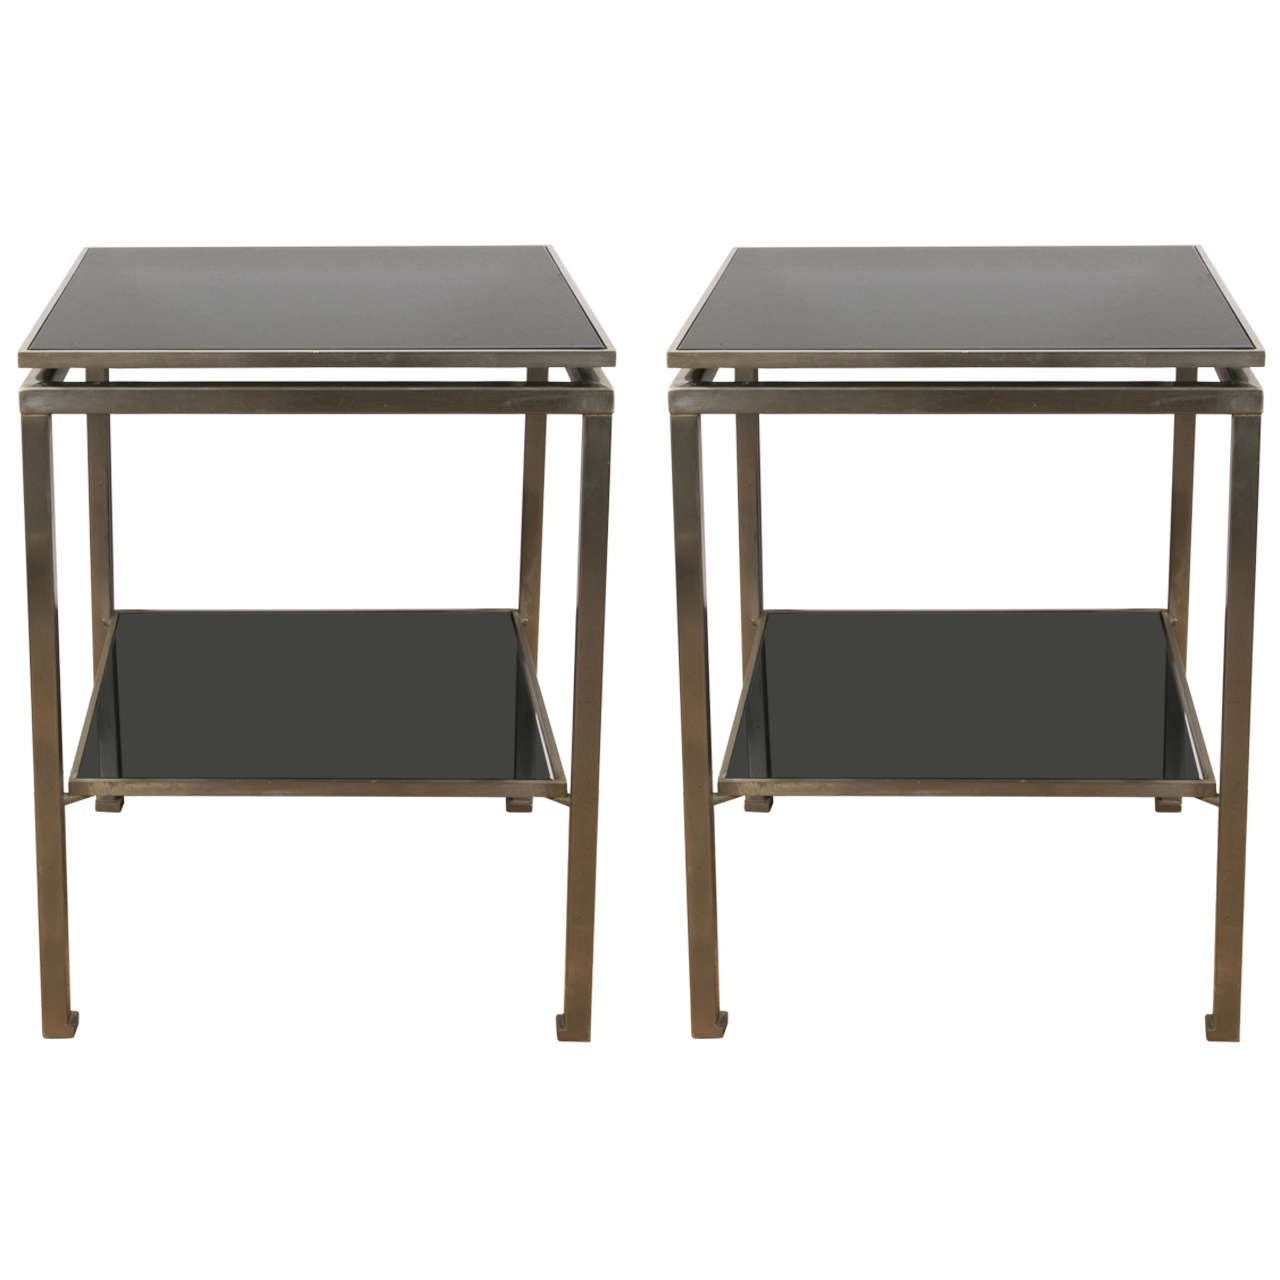 Pair of Two Tier Steel Tables by Guy Lefevre